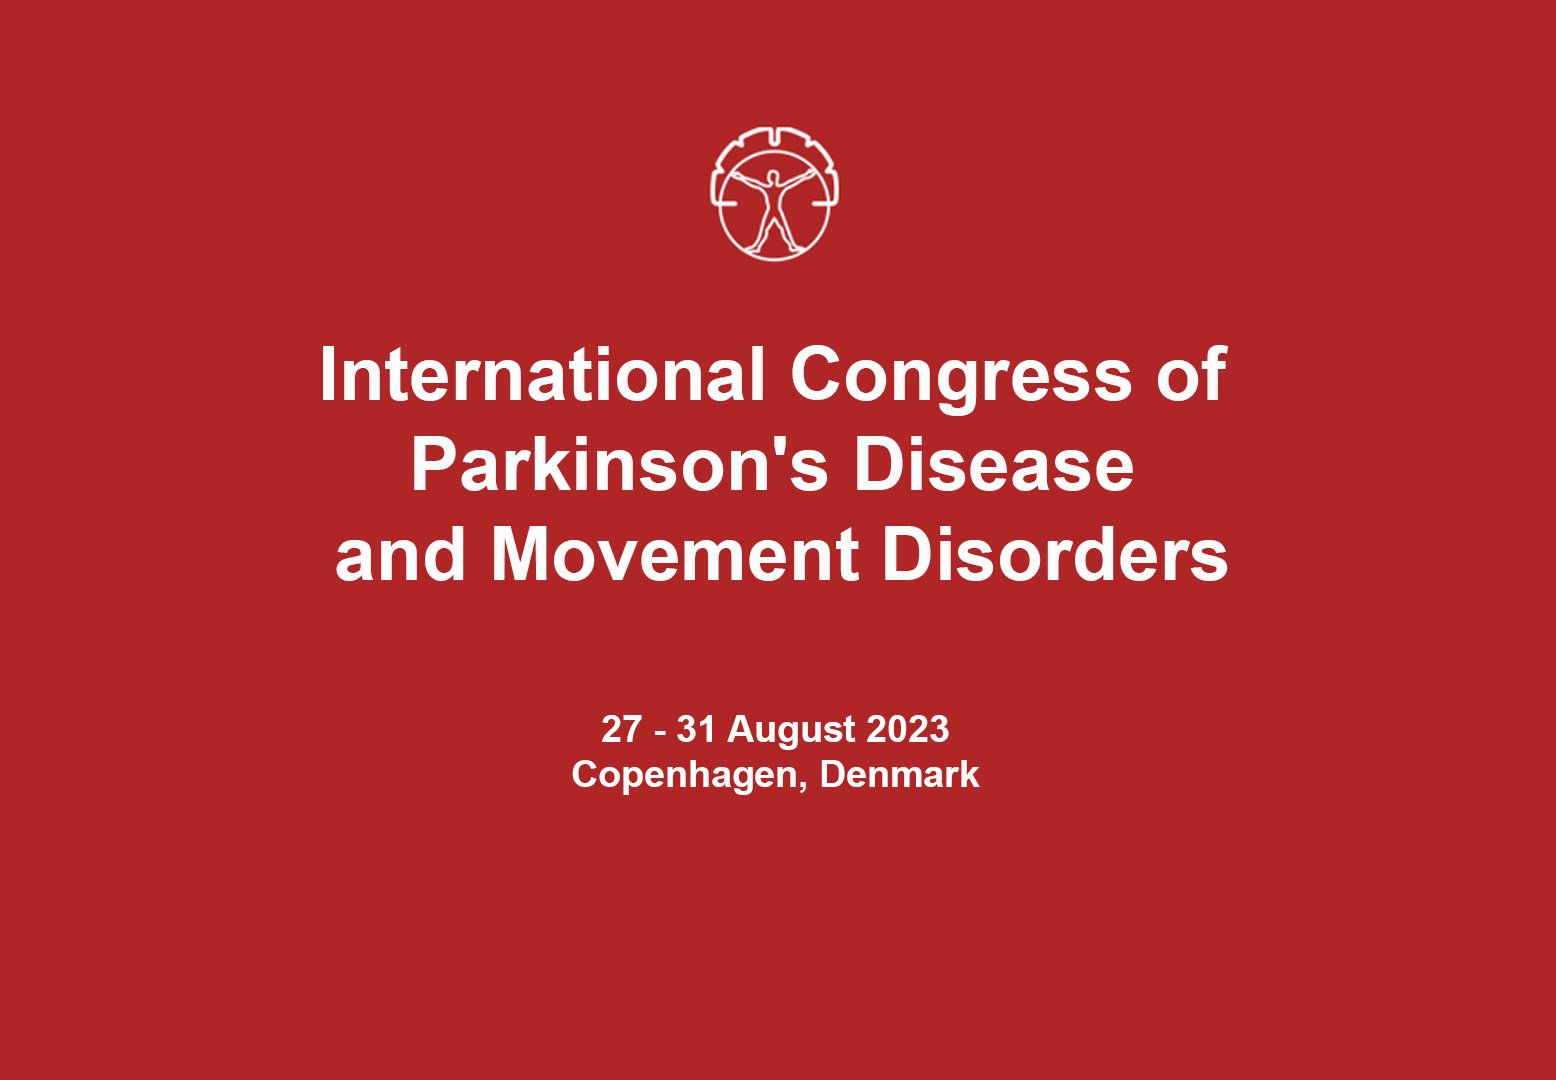 MDS 2023 – International Congress of Parkinson’s Disease and Movement Disorders 2023 (Videos)